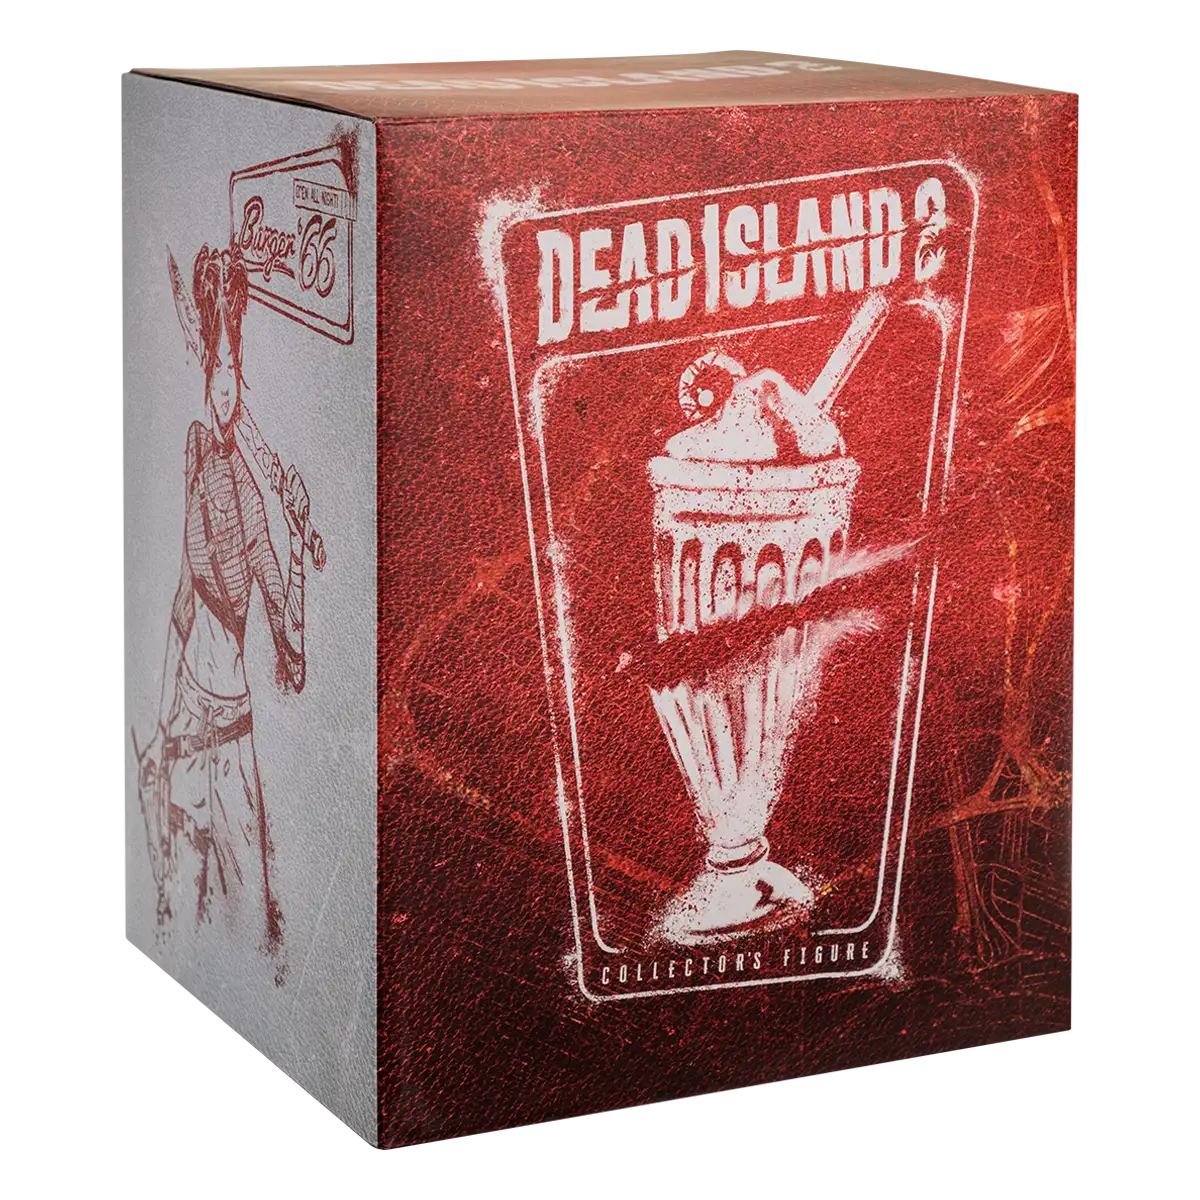 Dead Island 2 Collector's Statue "Amy" Thumbnail 13